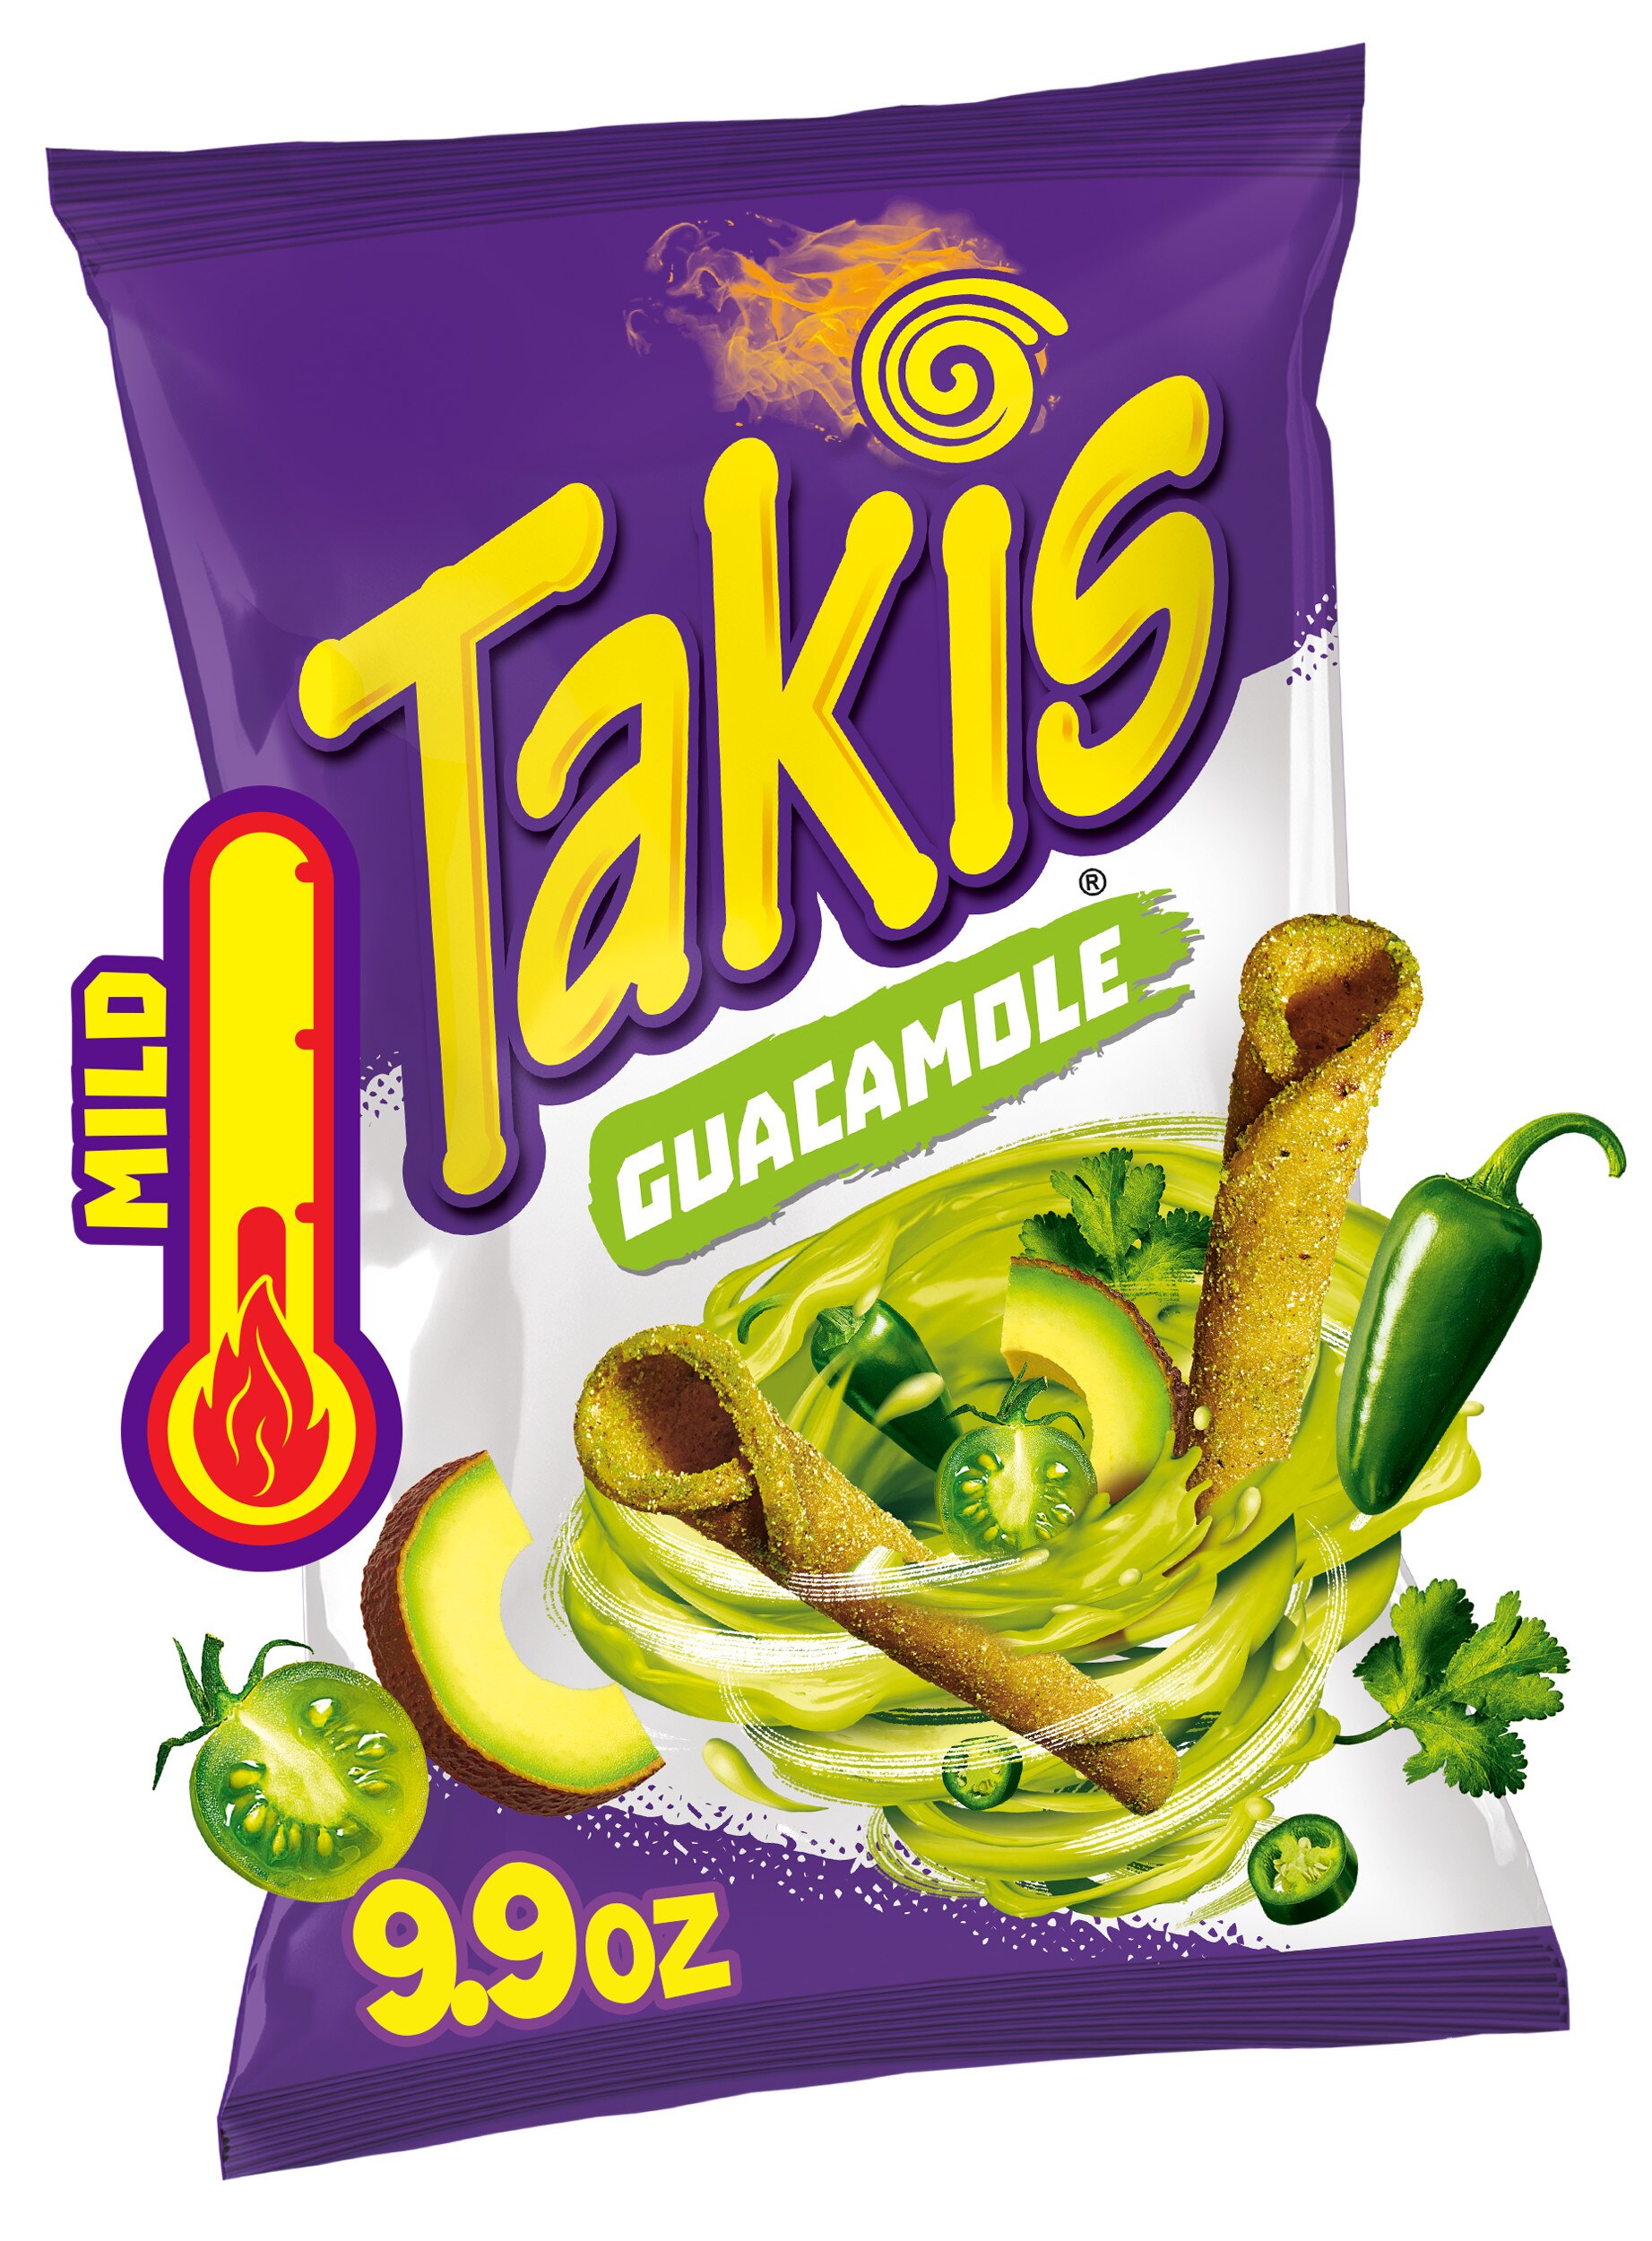 Takis Guacamole Rolled Tortilla Chips, 9.9 OZ